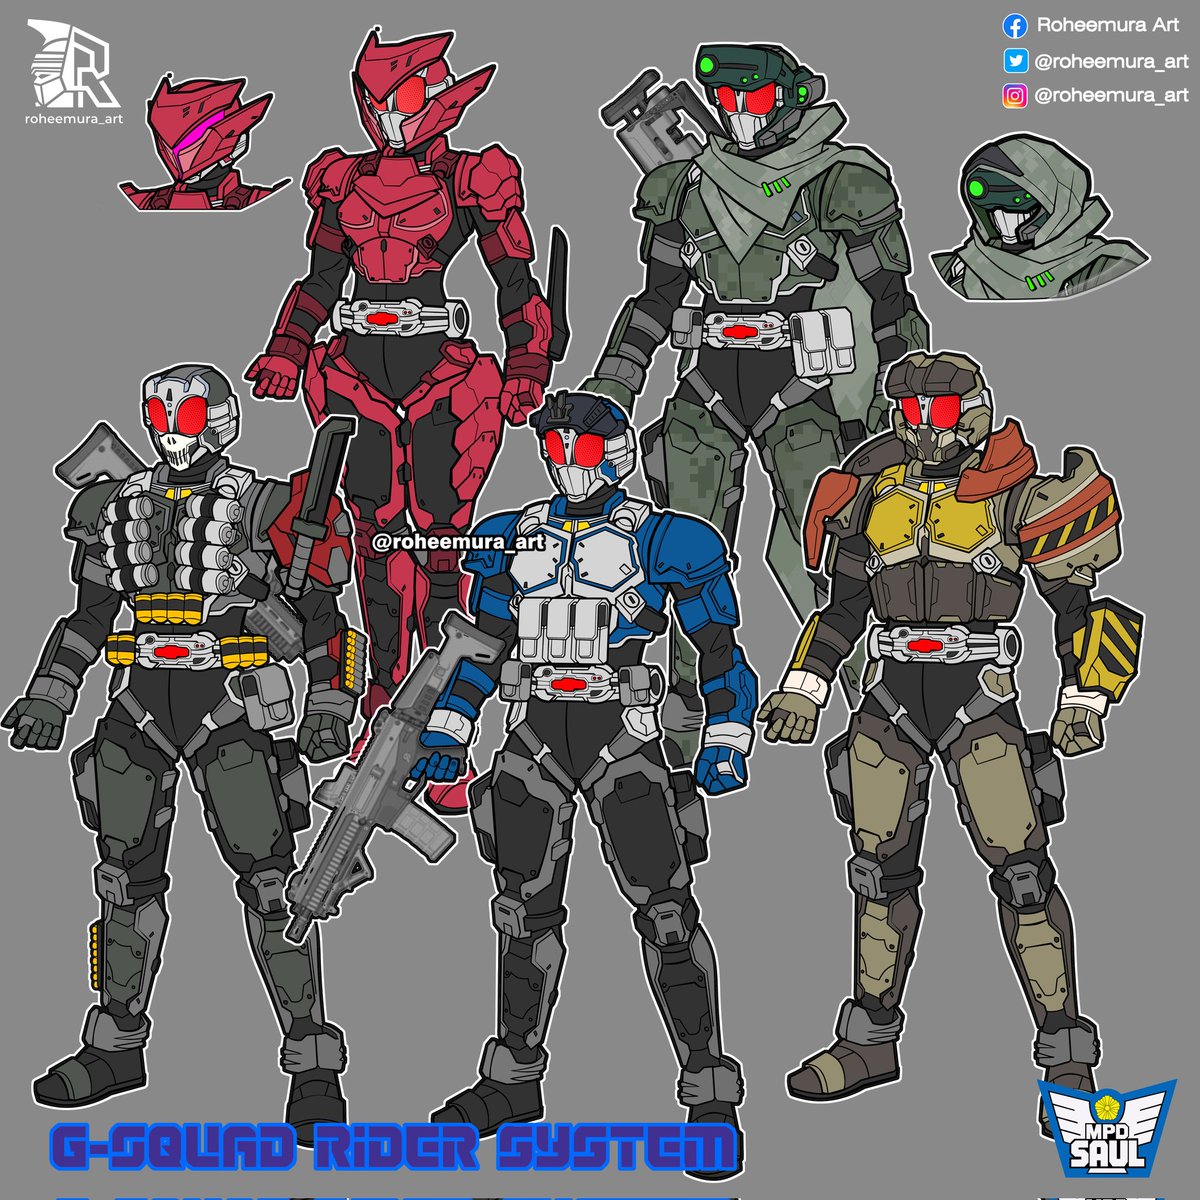 What if Kamen Rider G3 System developed into a squad Inspired by: Halo Reach Noble Team Astral Chain Star Wars Bad Batch All You Need Is K*LL manga Edge of Tomorrow Gvn made by @deltasixomen (IG) #kamenriderg3 #kamenrider #HaloReach #nobleteam #badbatch #tokusatsu